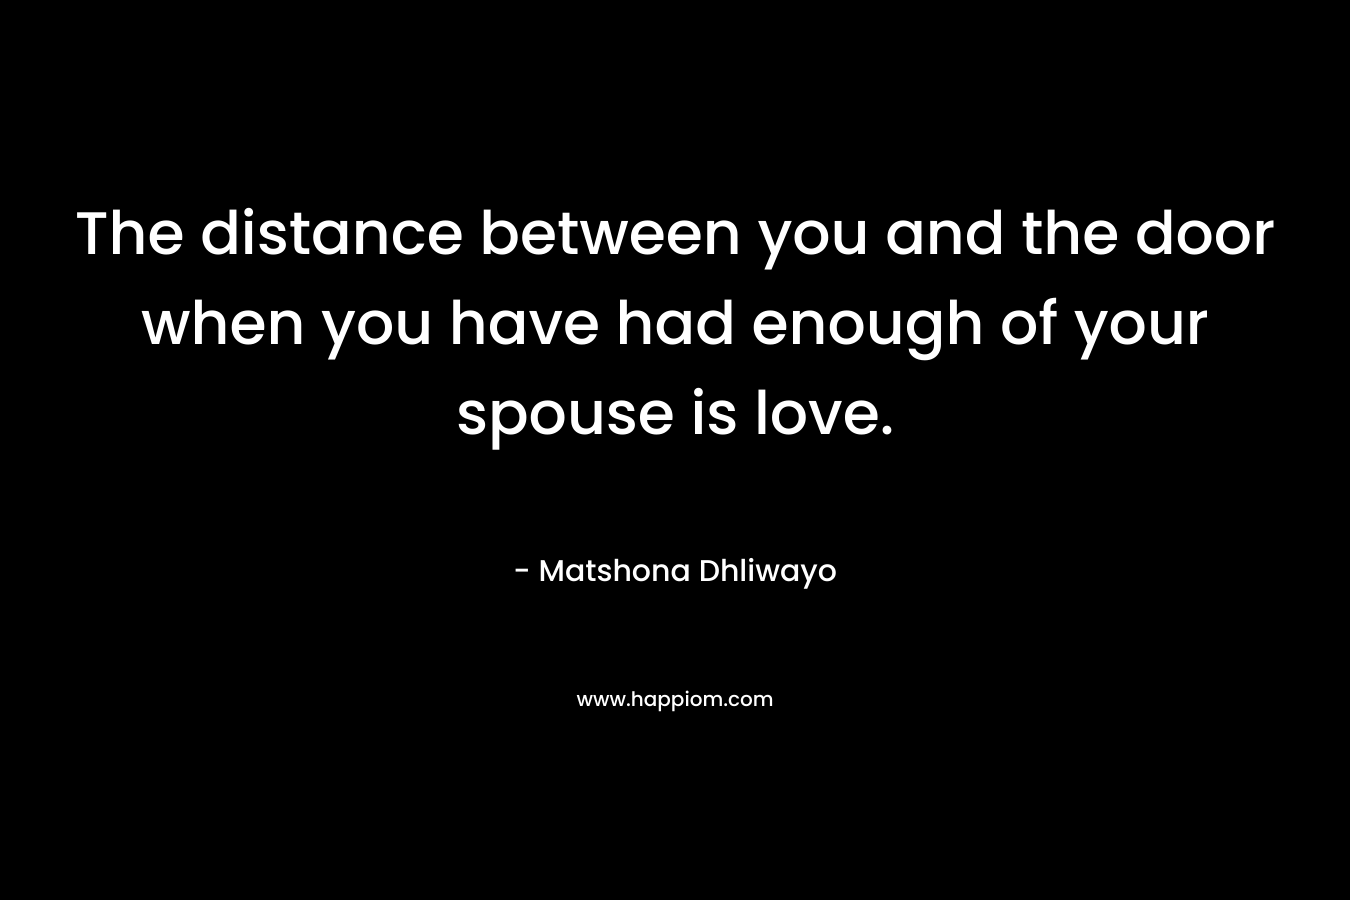 The distance between you and the door when you have had enough of your spouse is love. – Matshona Dhliwayo